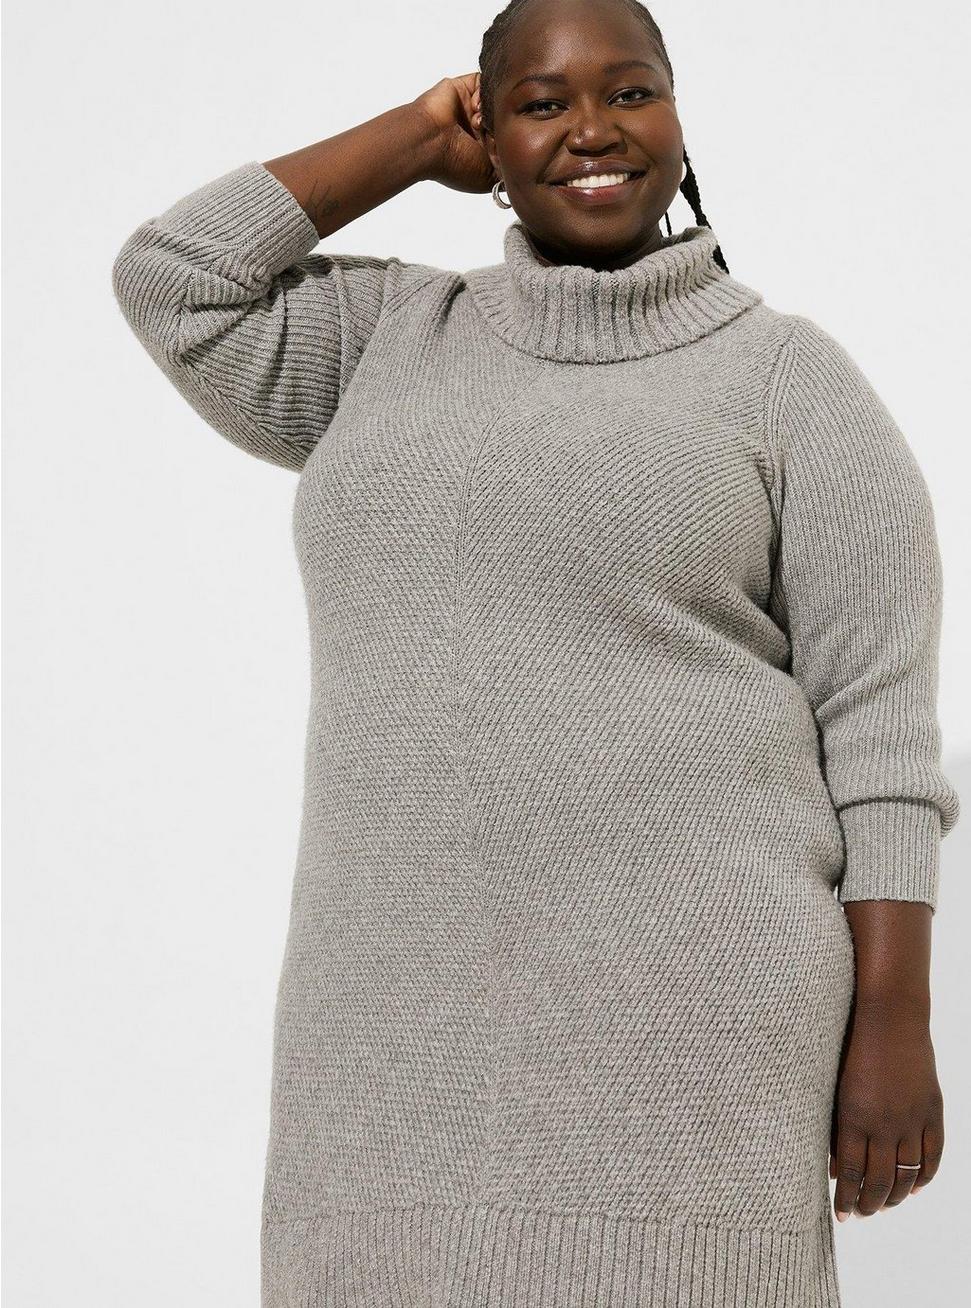 At The Knee Sweater Cowl Neck Dress, HEATHER GREY, alternate